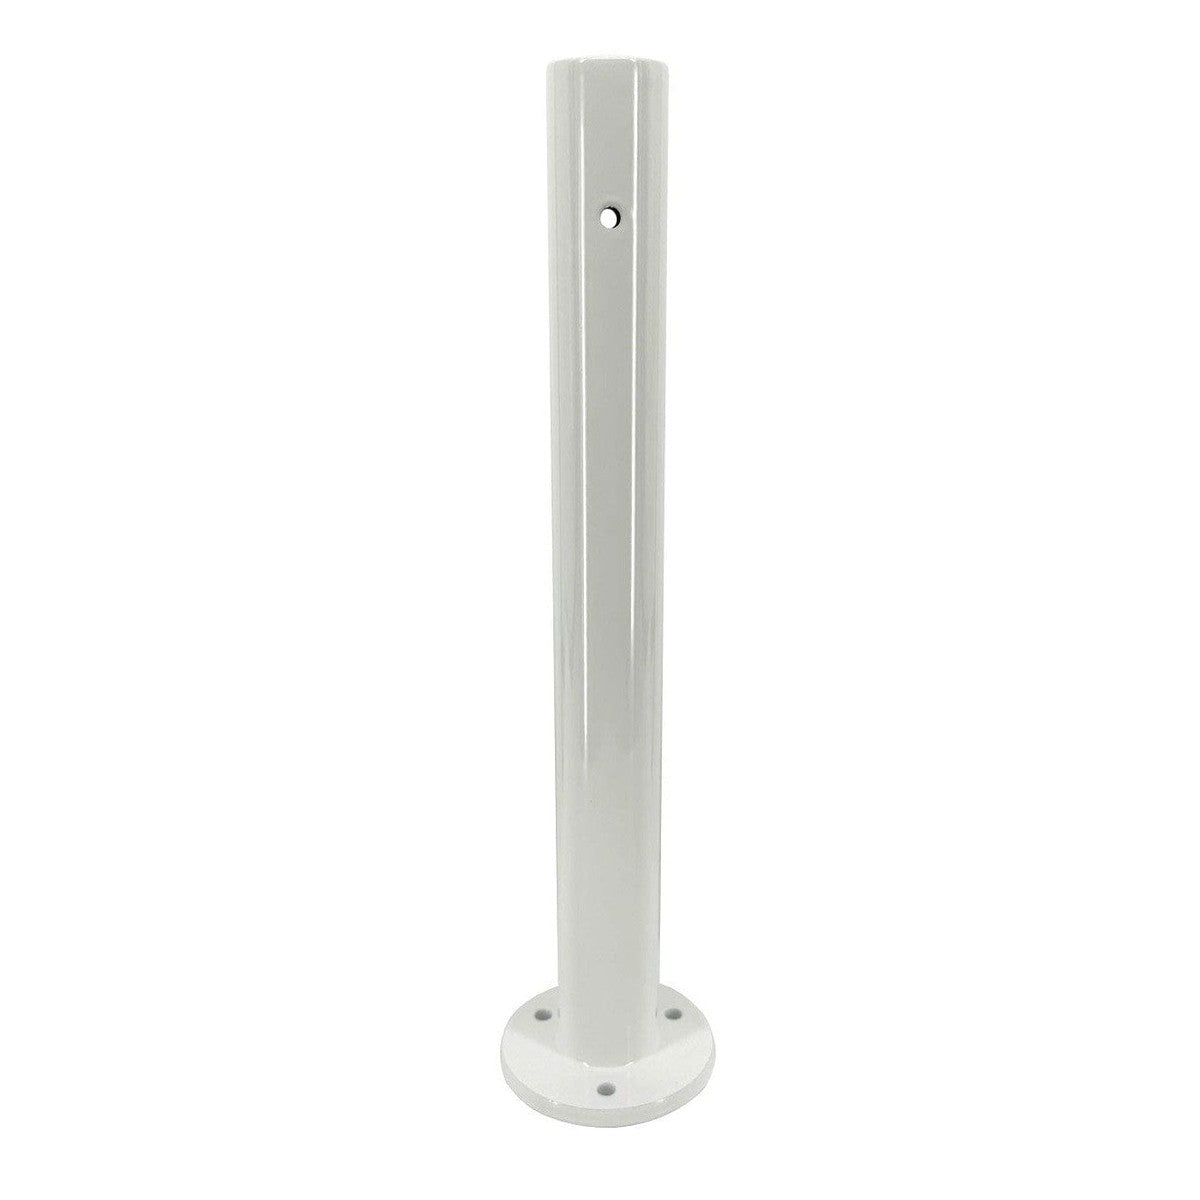 Seaview Qualifies for Free Shipping Seaview 24" Light Post Requires Light Bar Top #SVLTP24